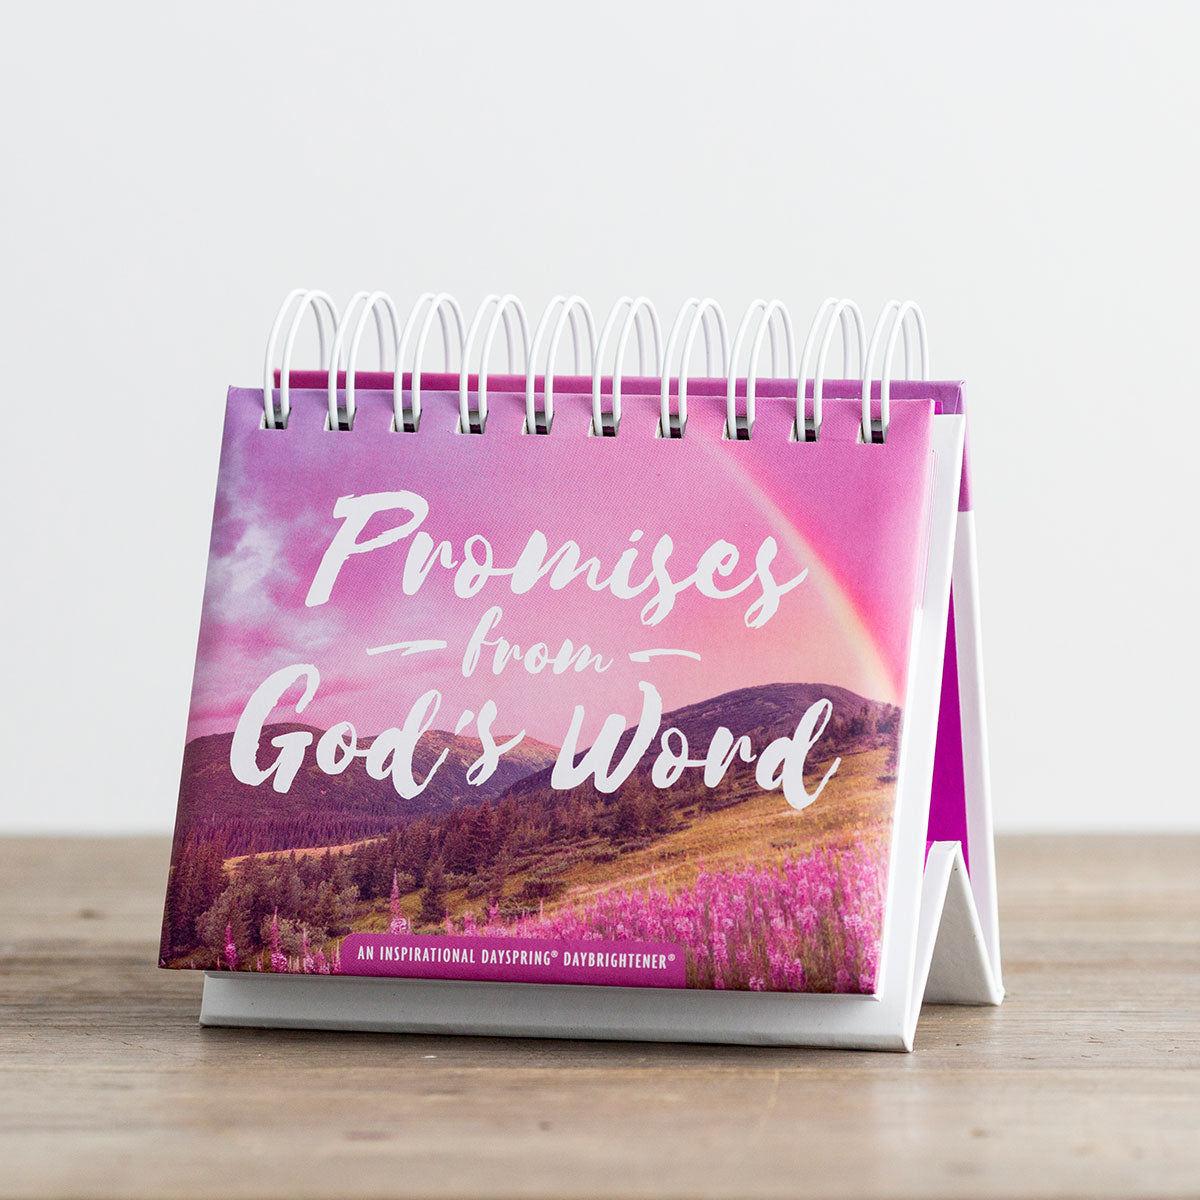 Image of Promises from God's Word - Perpetual Calendar other